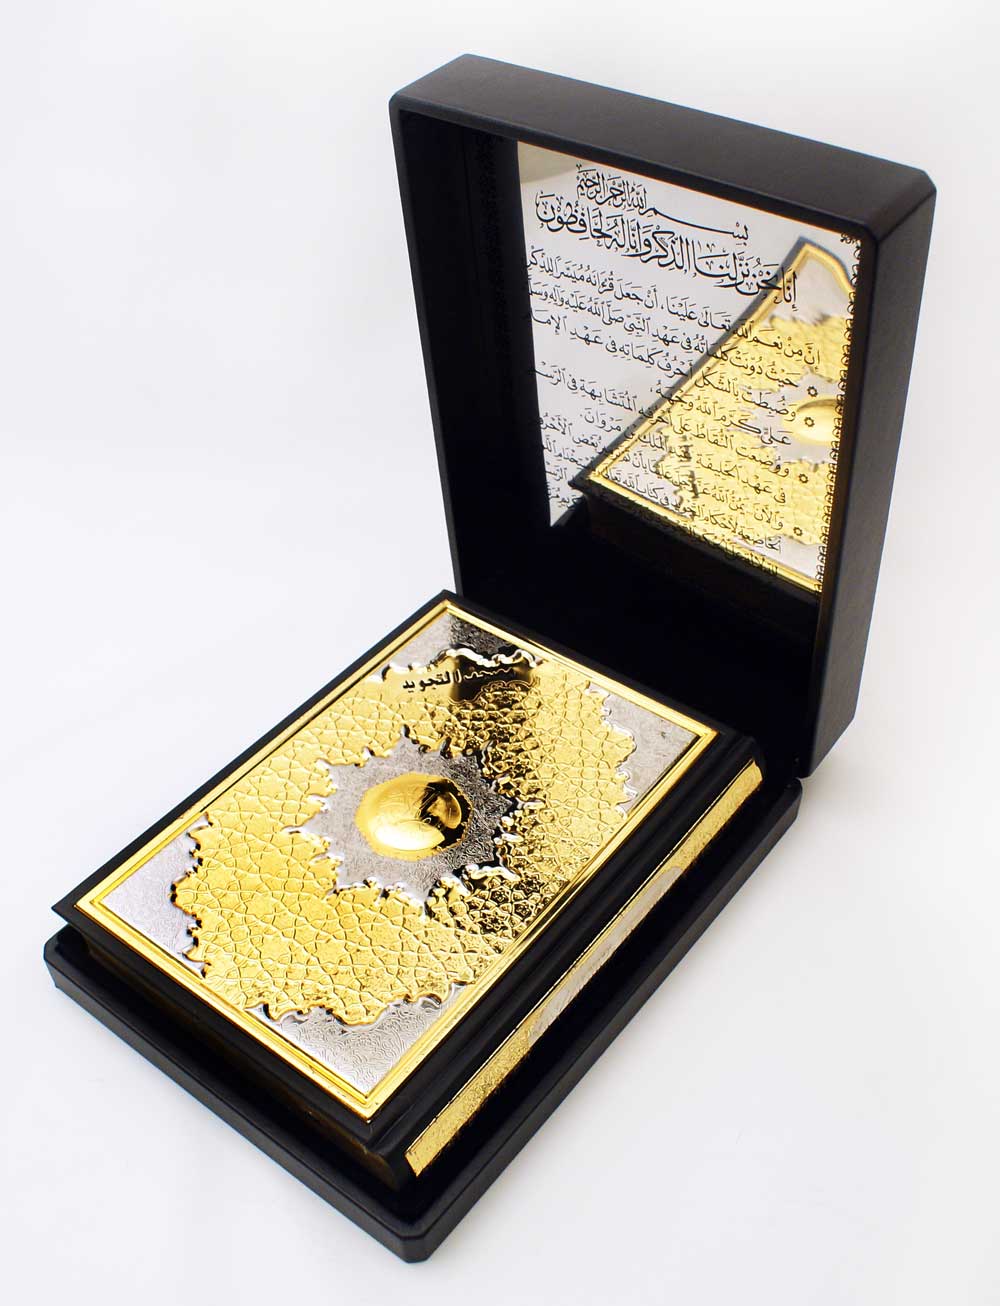 Tajweed Quran with Golden/Silver Panel in an Elegant Leather Box  